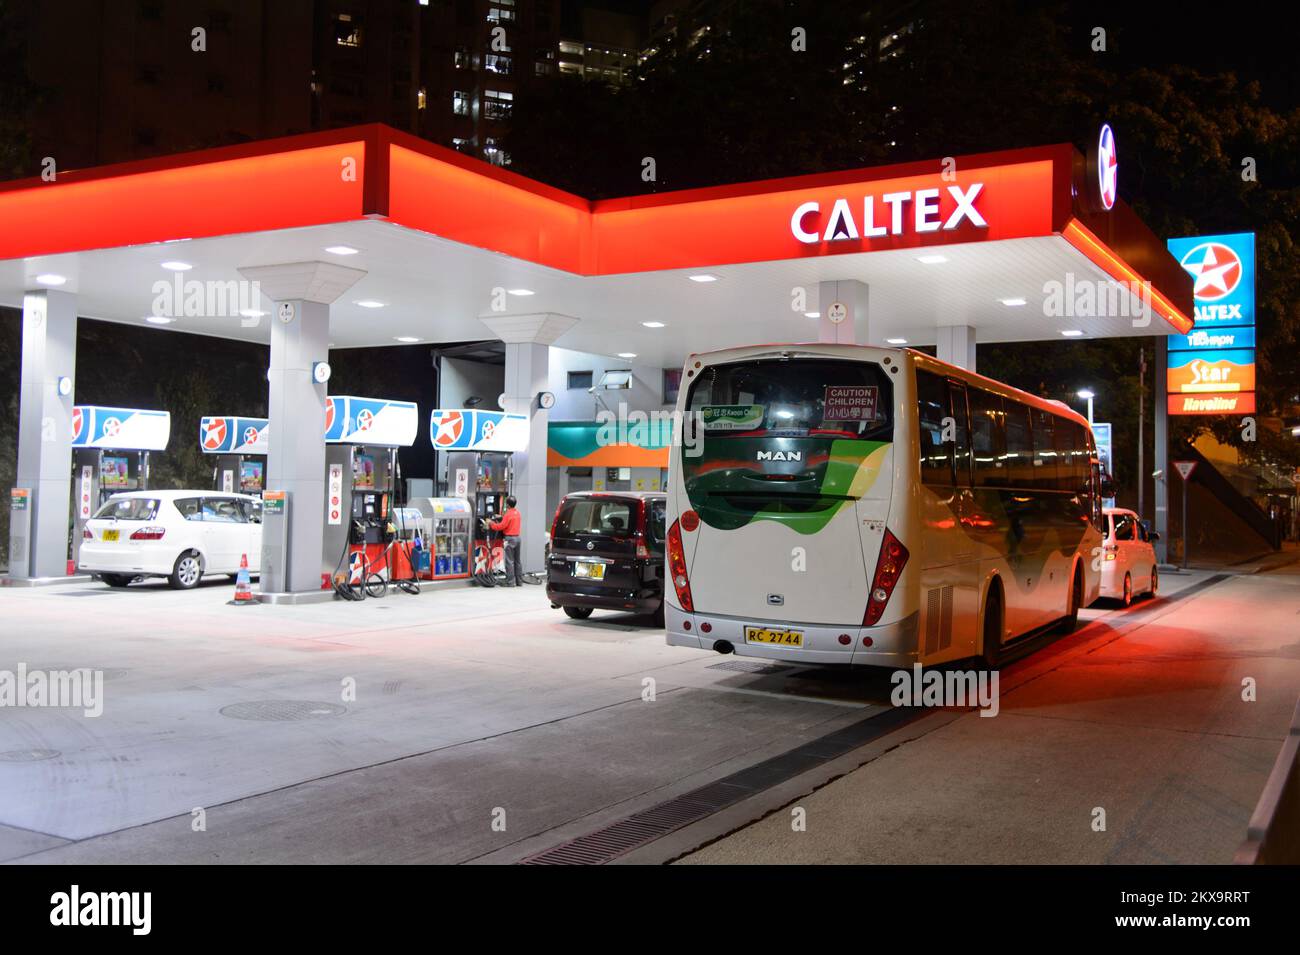 HONG KONG - APRIL 15, 2015: Caltex fuel station at evening. Caltex is a petroleum brand name of Chevron Corporation used in more than 60 countries in Stock Photo